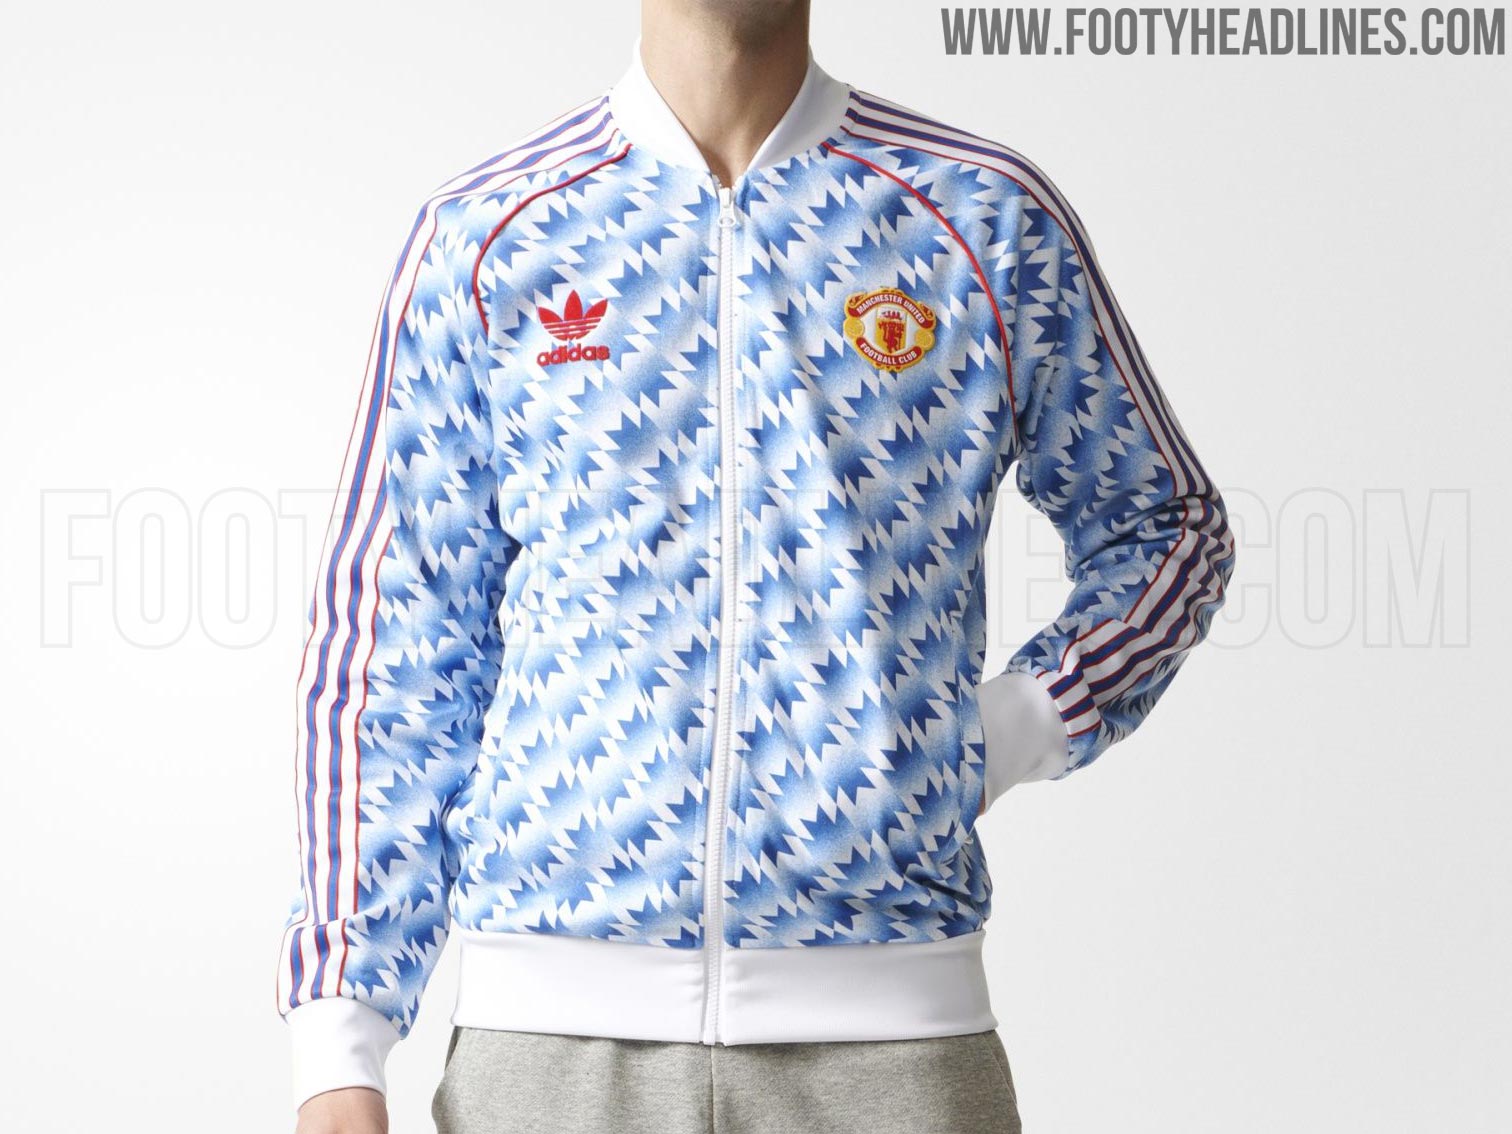 1992-Inspired Adidas Originals Manchester United Track Top Leaked